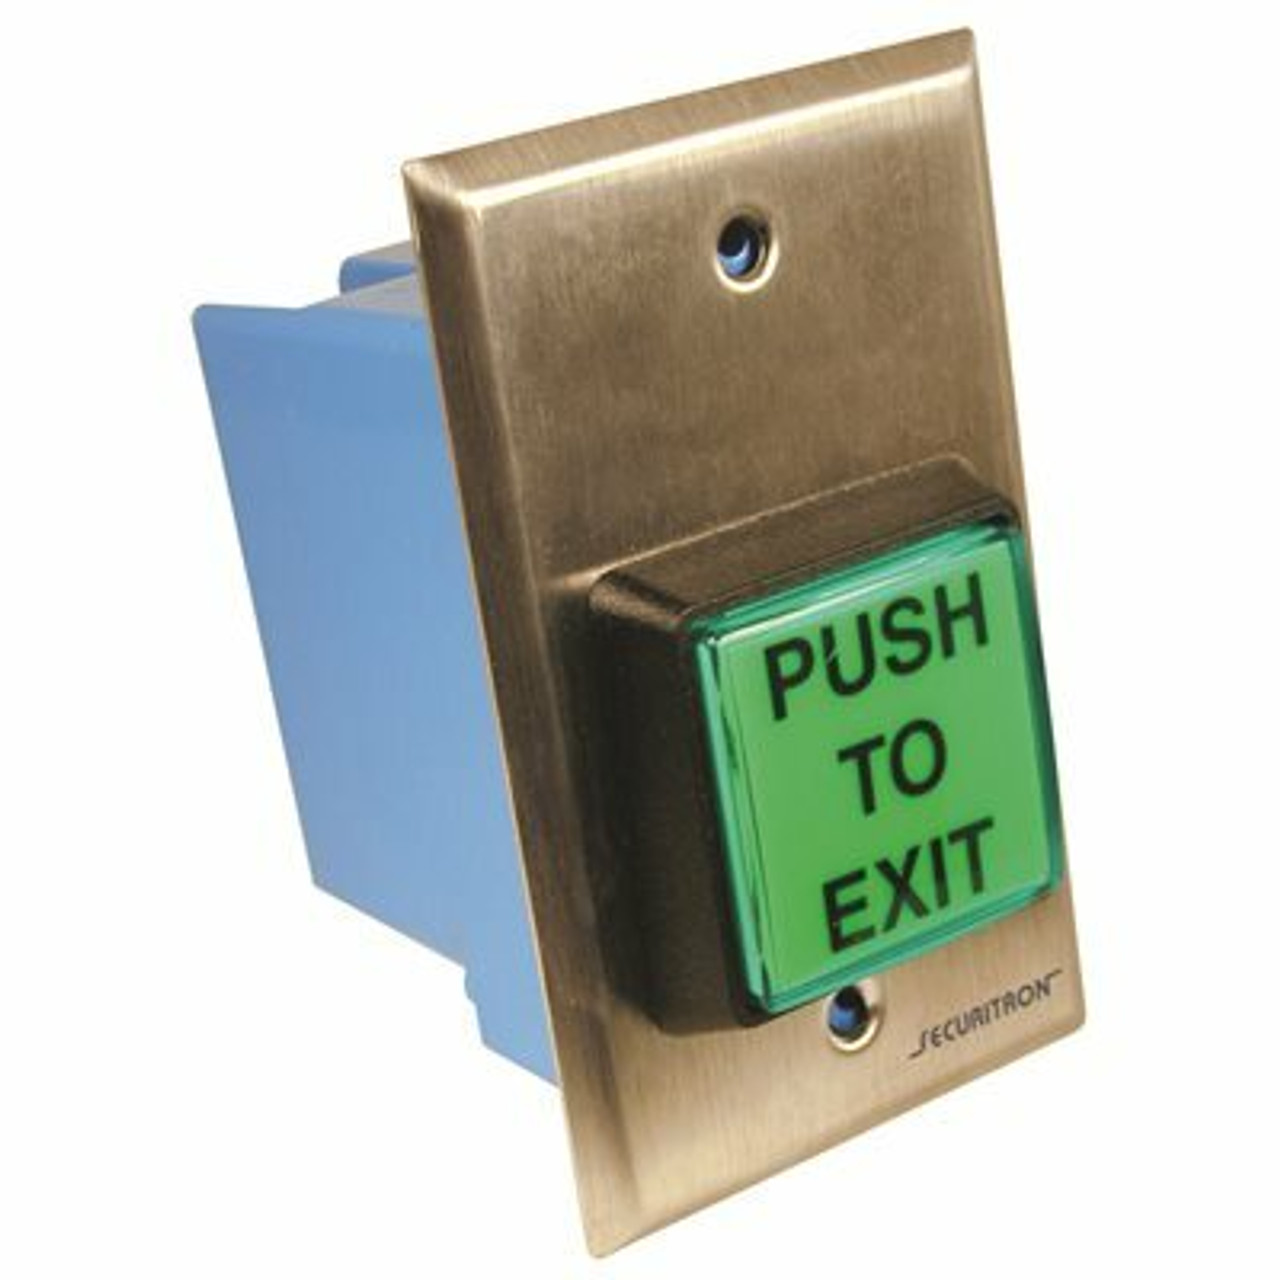 Securitron Securitron Push To Exit Button With Multiple Lenses